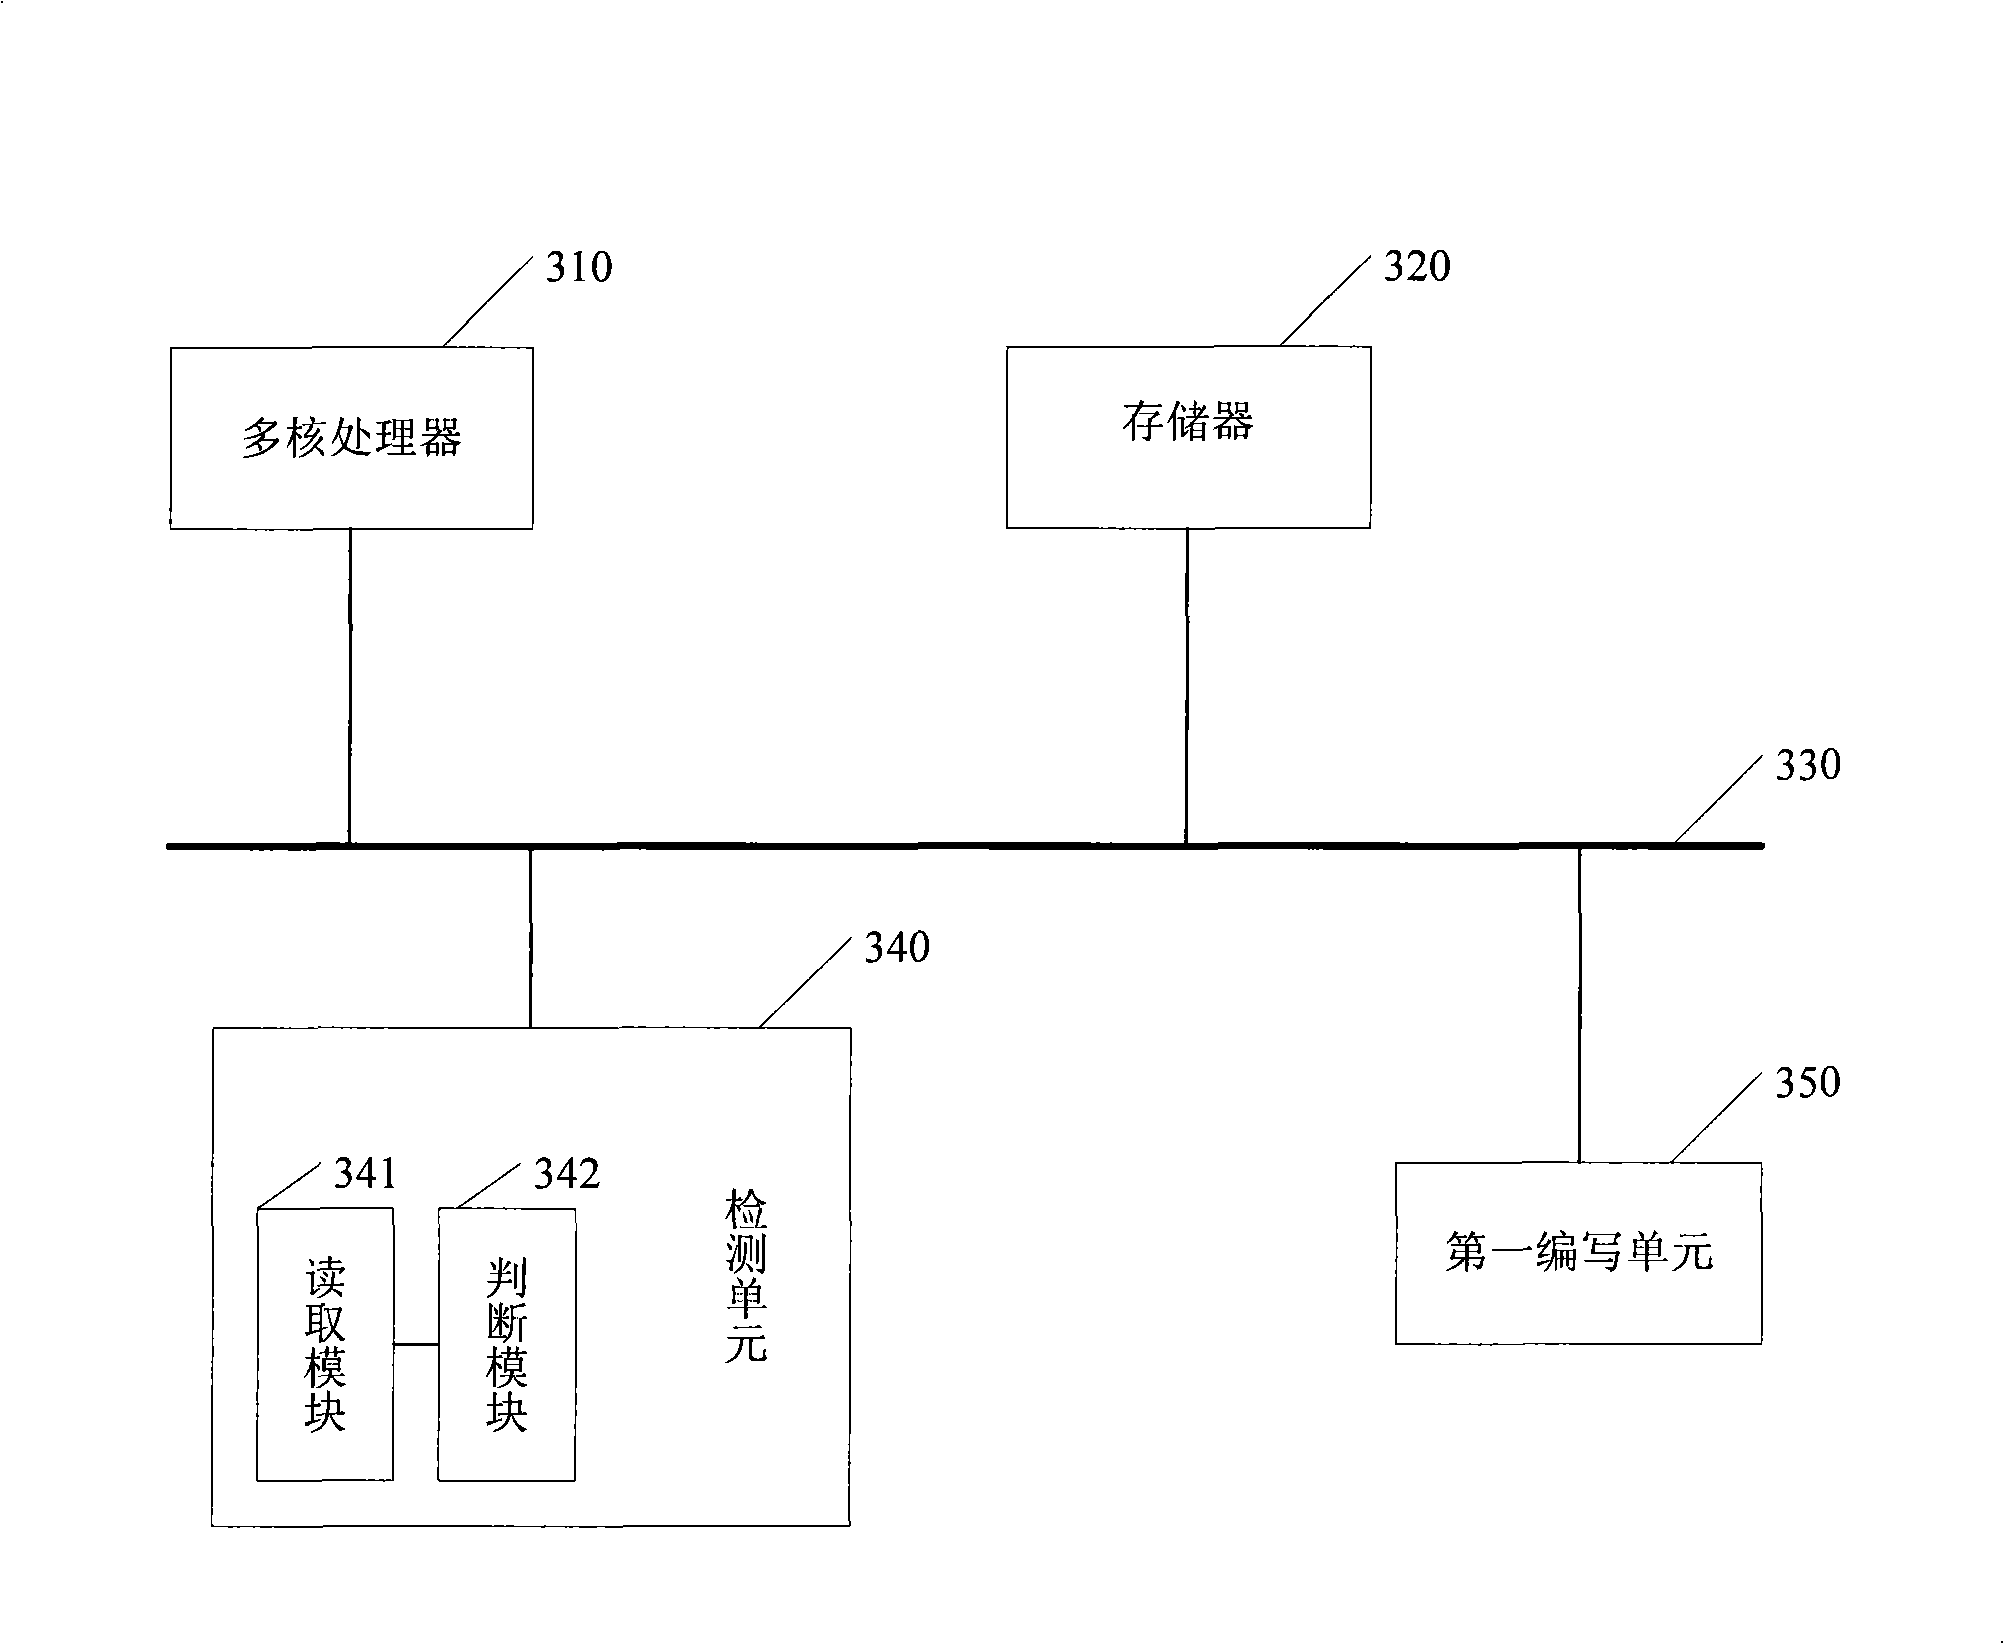 Locking method for self-spinning lock and computer system